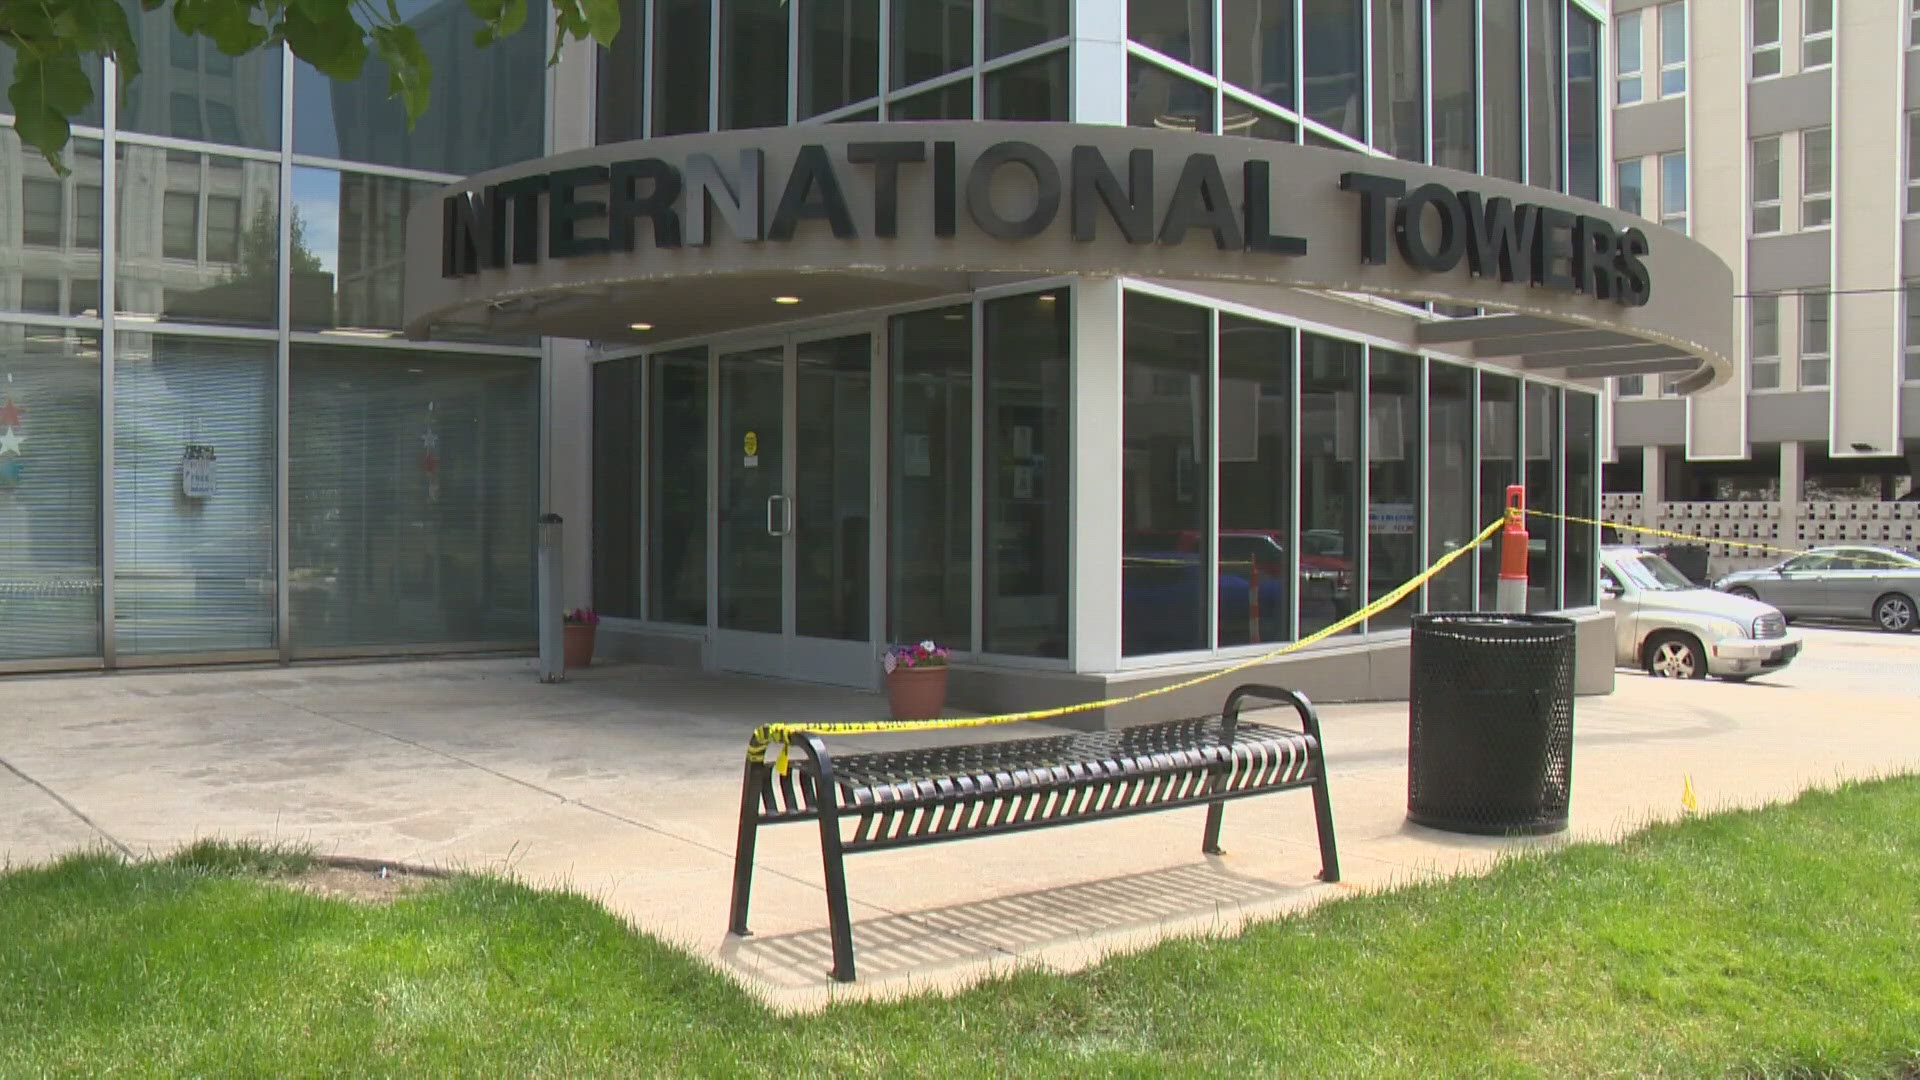 Youngstown officials had ordered the evacuation of the International Towers on June 10.